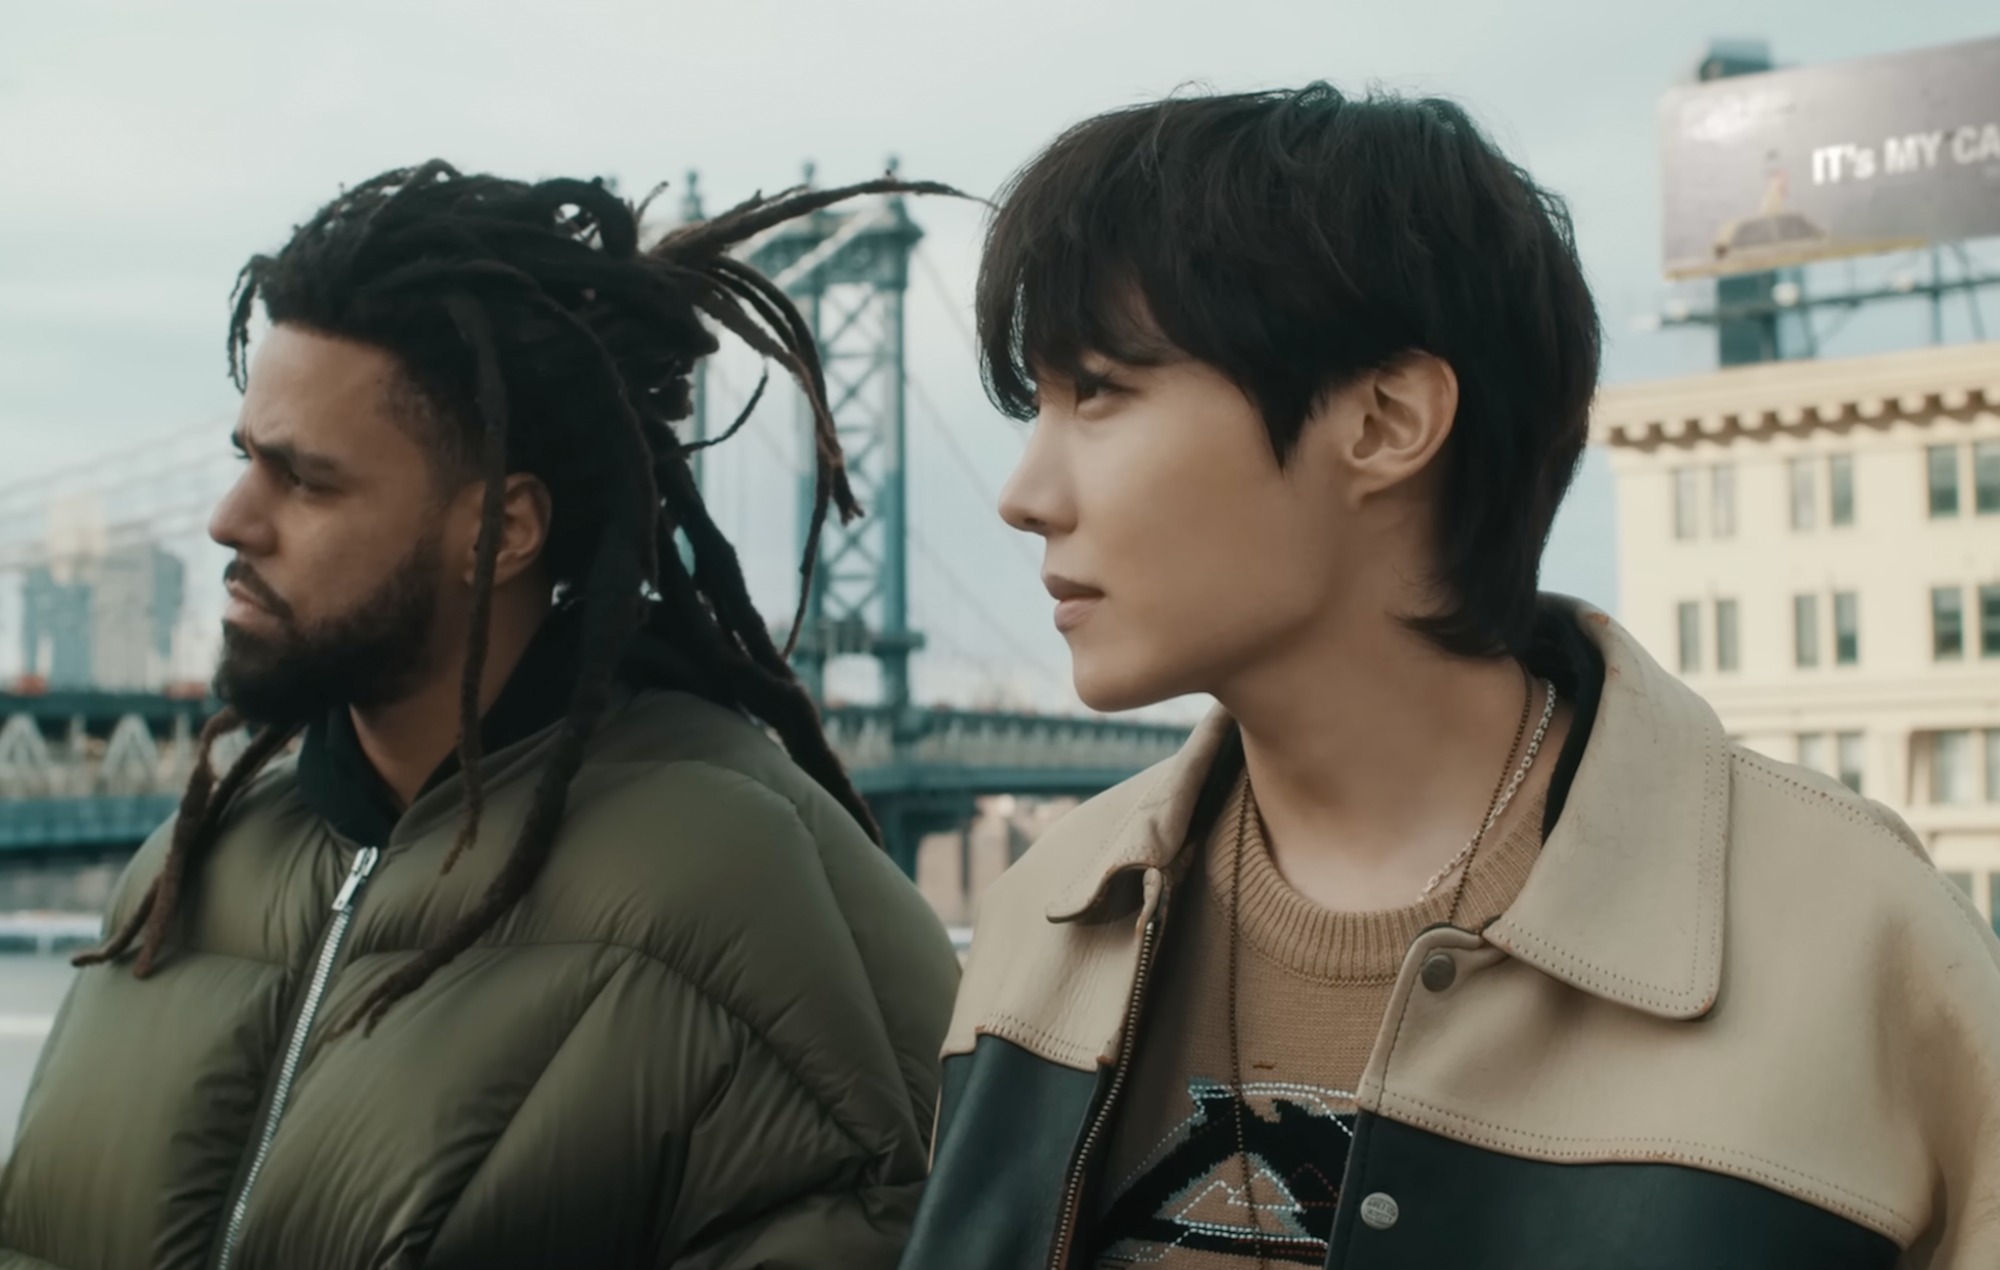 J-hope fulfils another fantasy with his J. Cole collab ‘On The Street’